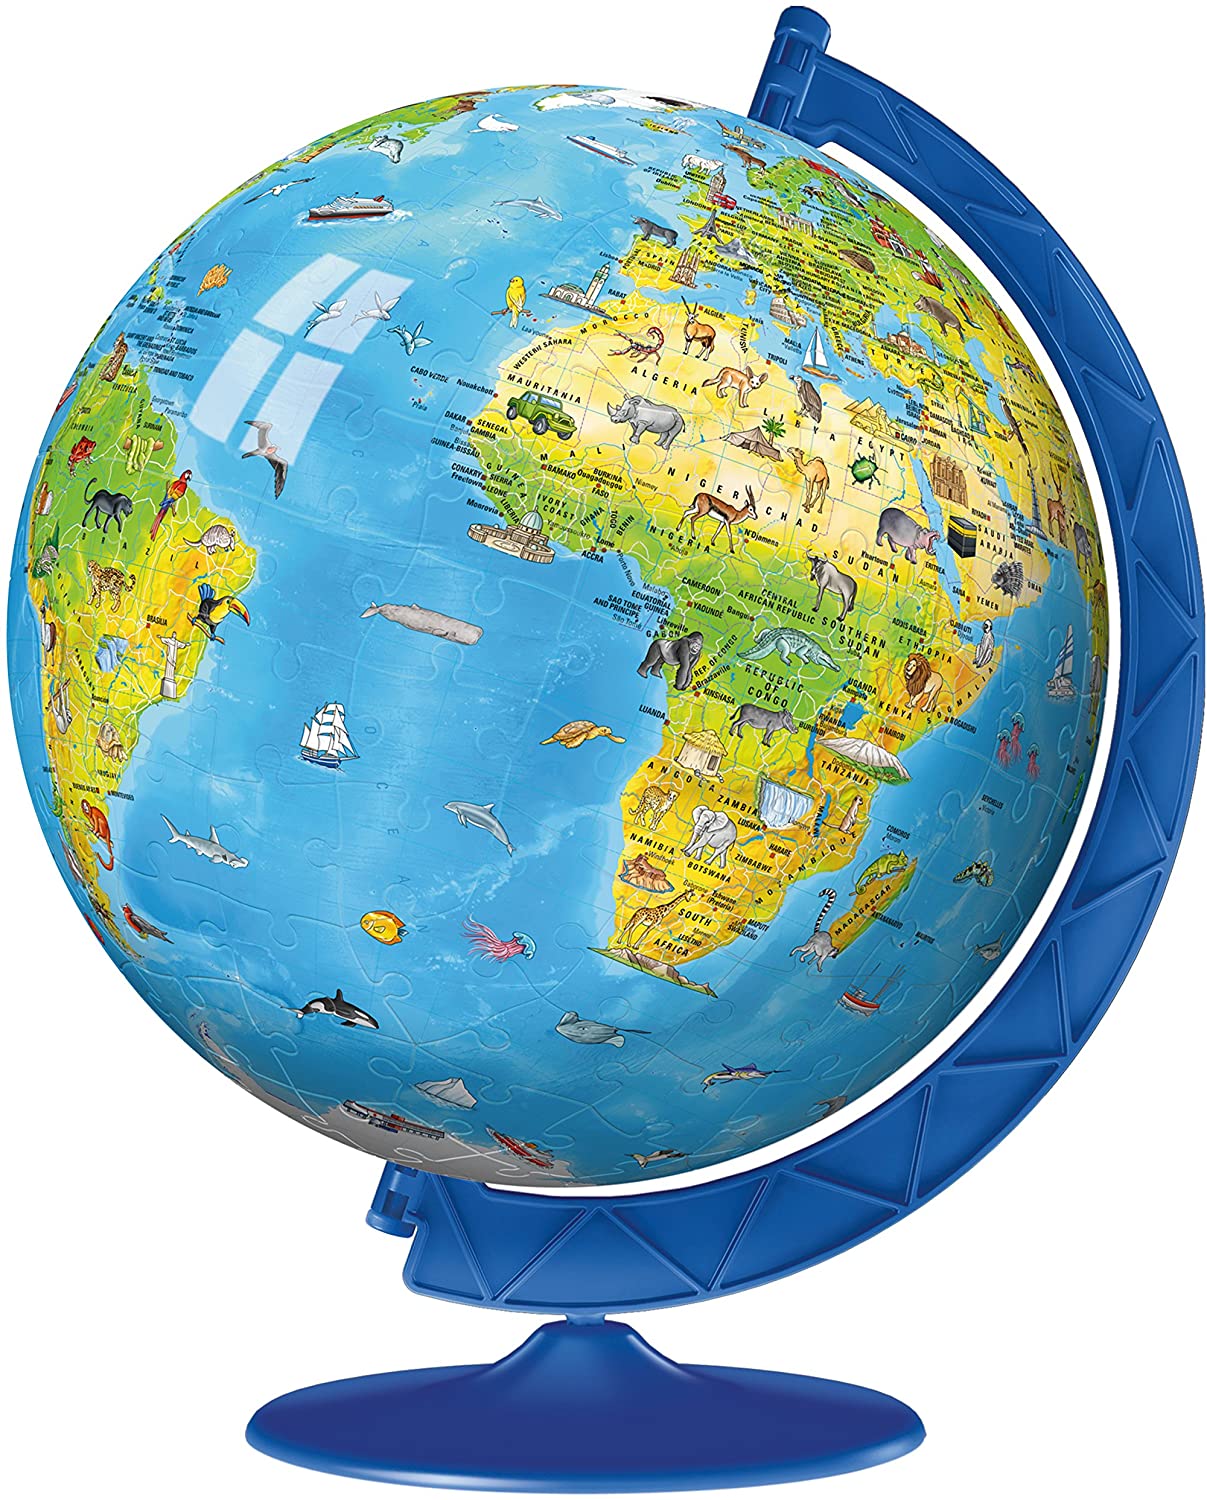 B1G1 30% Off Puzzles: 180-Pc Ravensburger Kids' World Globe 3D Jigsaw Puzzle 2 for $17.84 ($8.92 Each) + Free Shipping on $35+